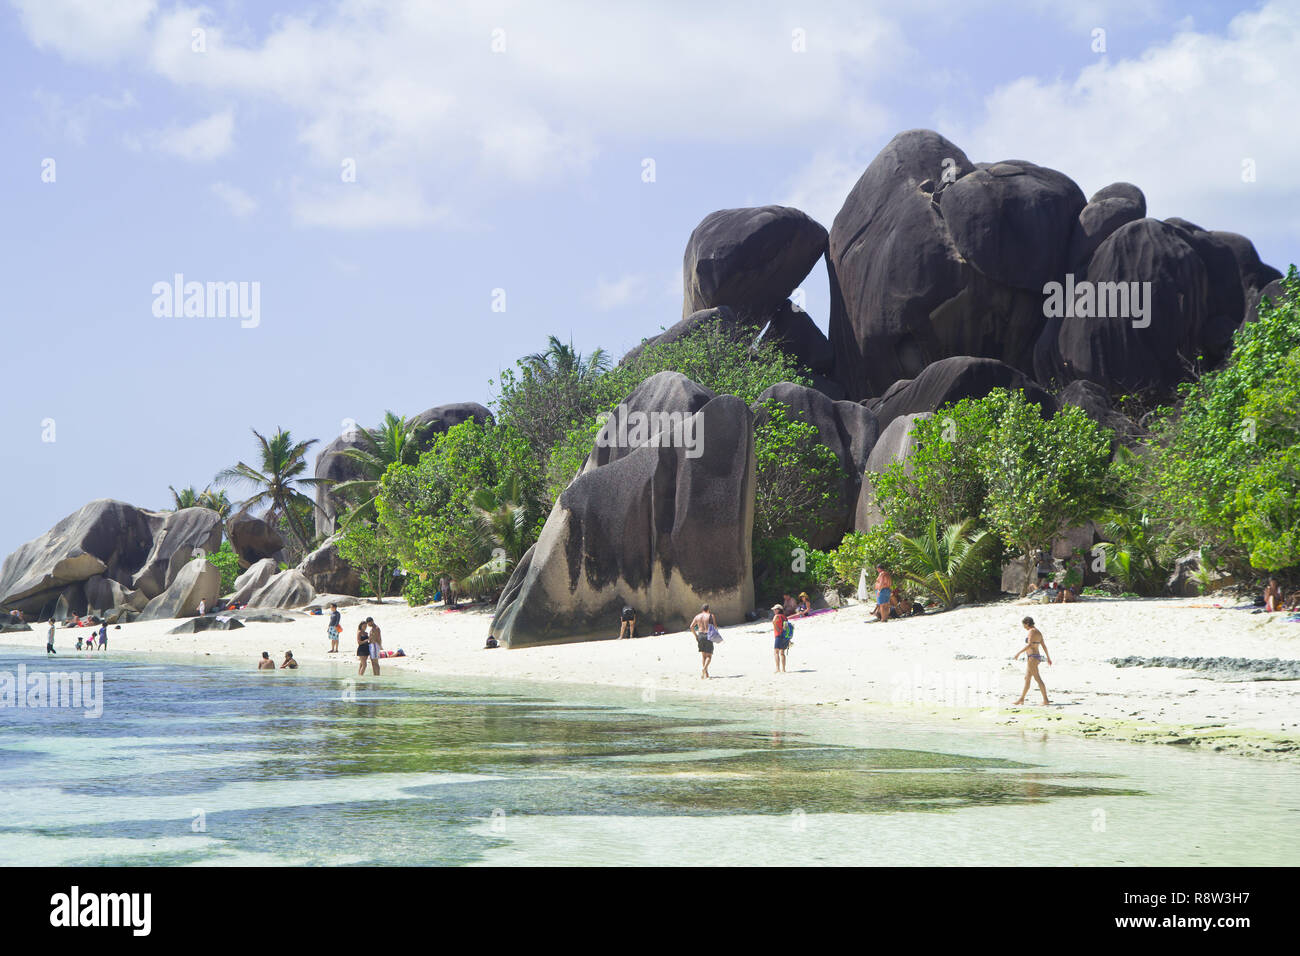 Anse Source d'Argent, La Digue-World-famous beach, and one of the most photographed spots in the whole world thanks to its amazing natural beauty Stock Photo